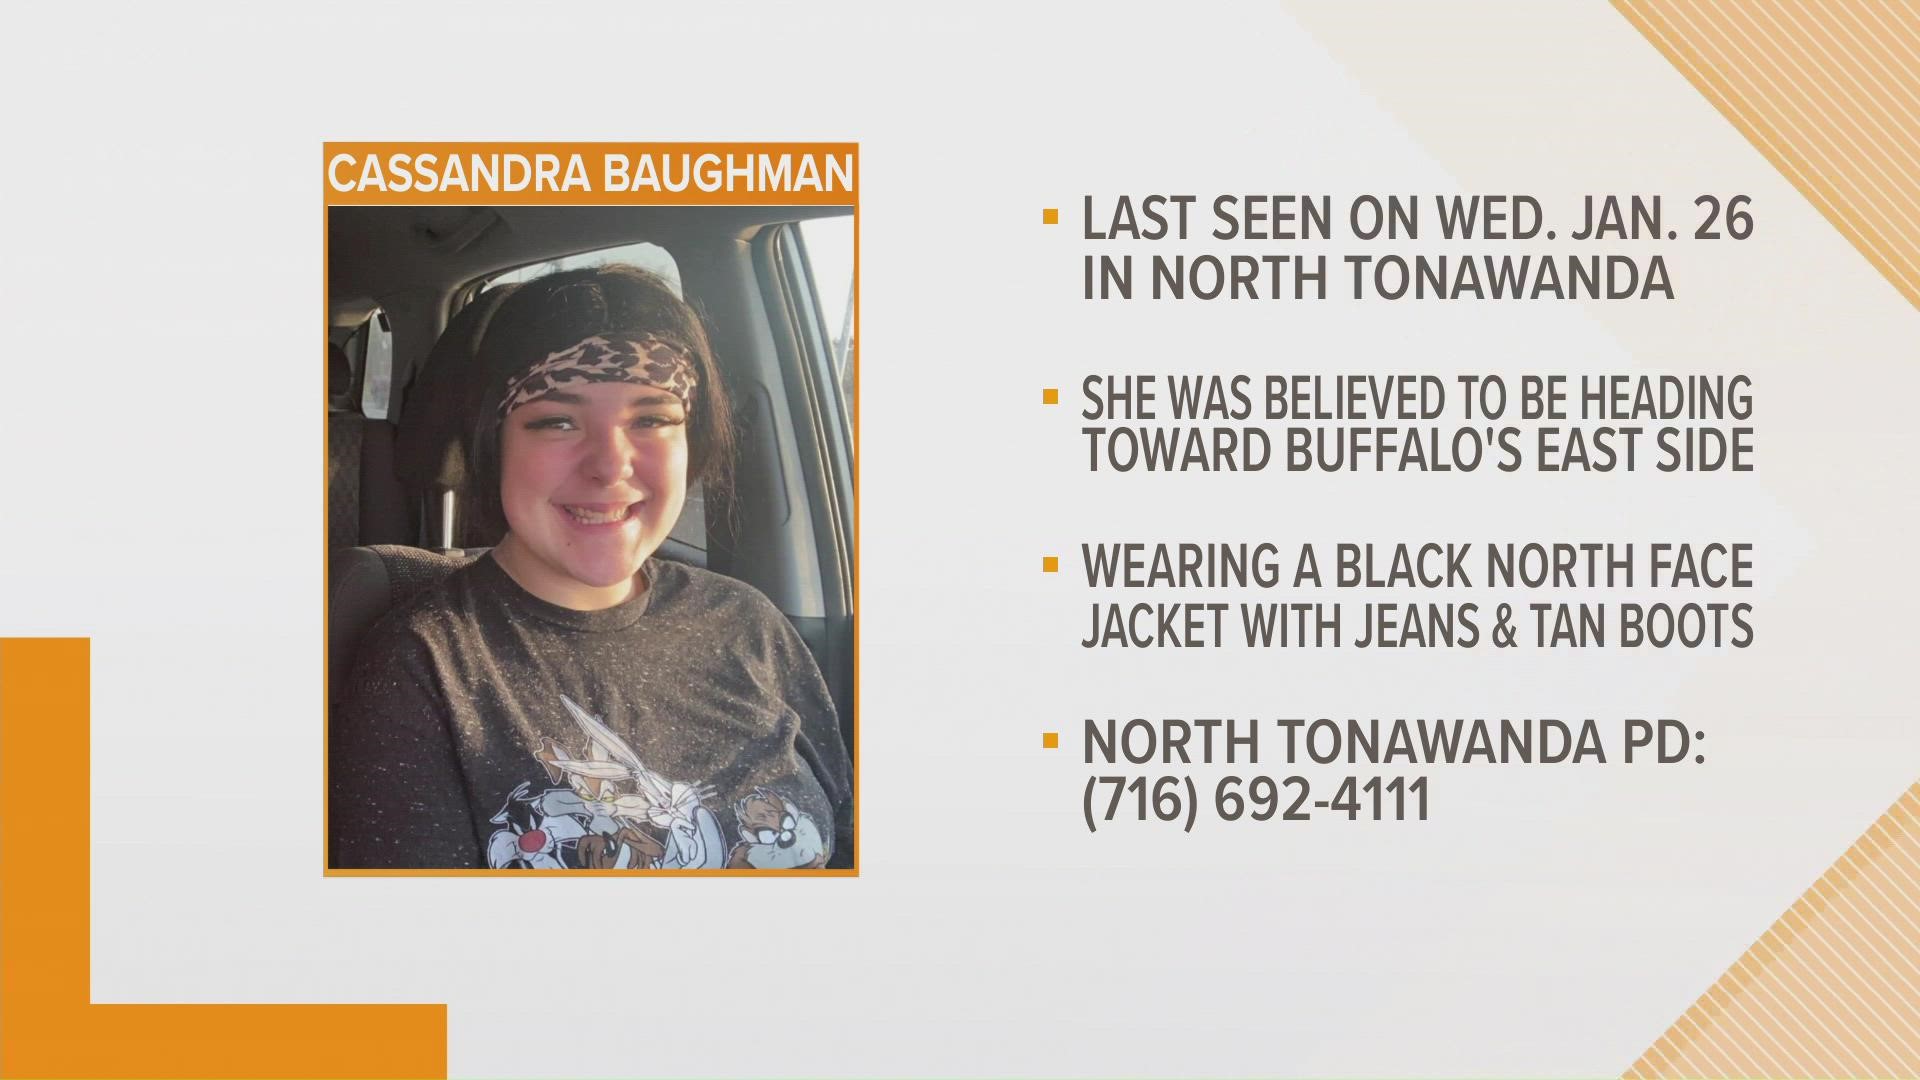 16-year-old Cassandra Baughman.
She was last seen by family in North Tonawanda on Wednesday.